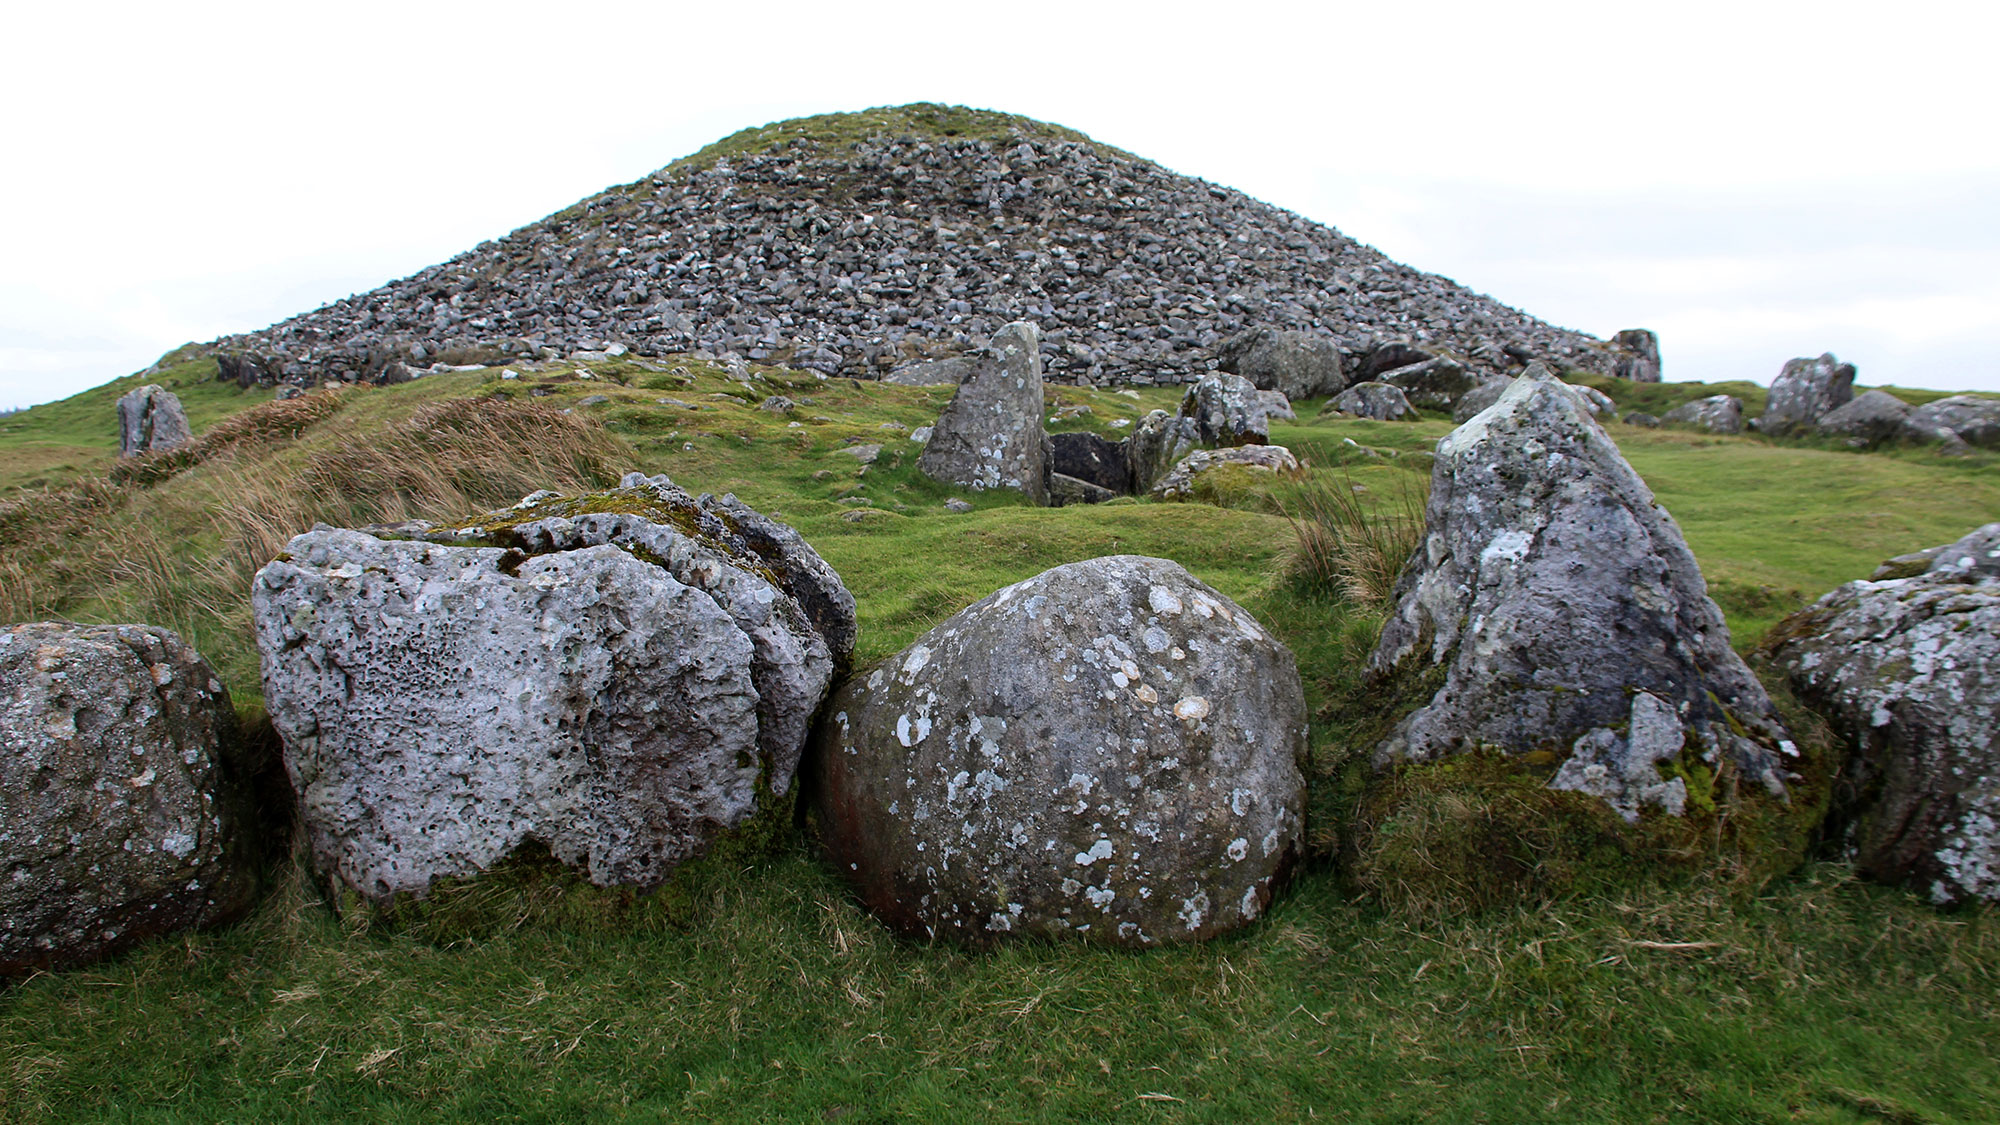 Looking into the chamber of Monument S with Cairn T beyond.